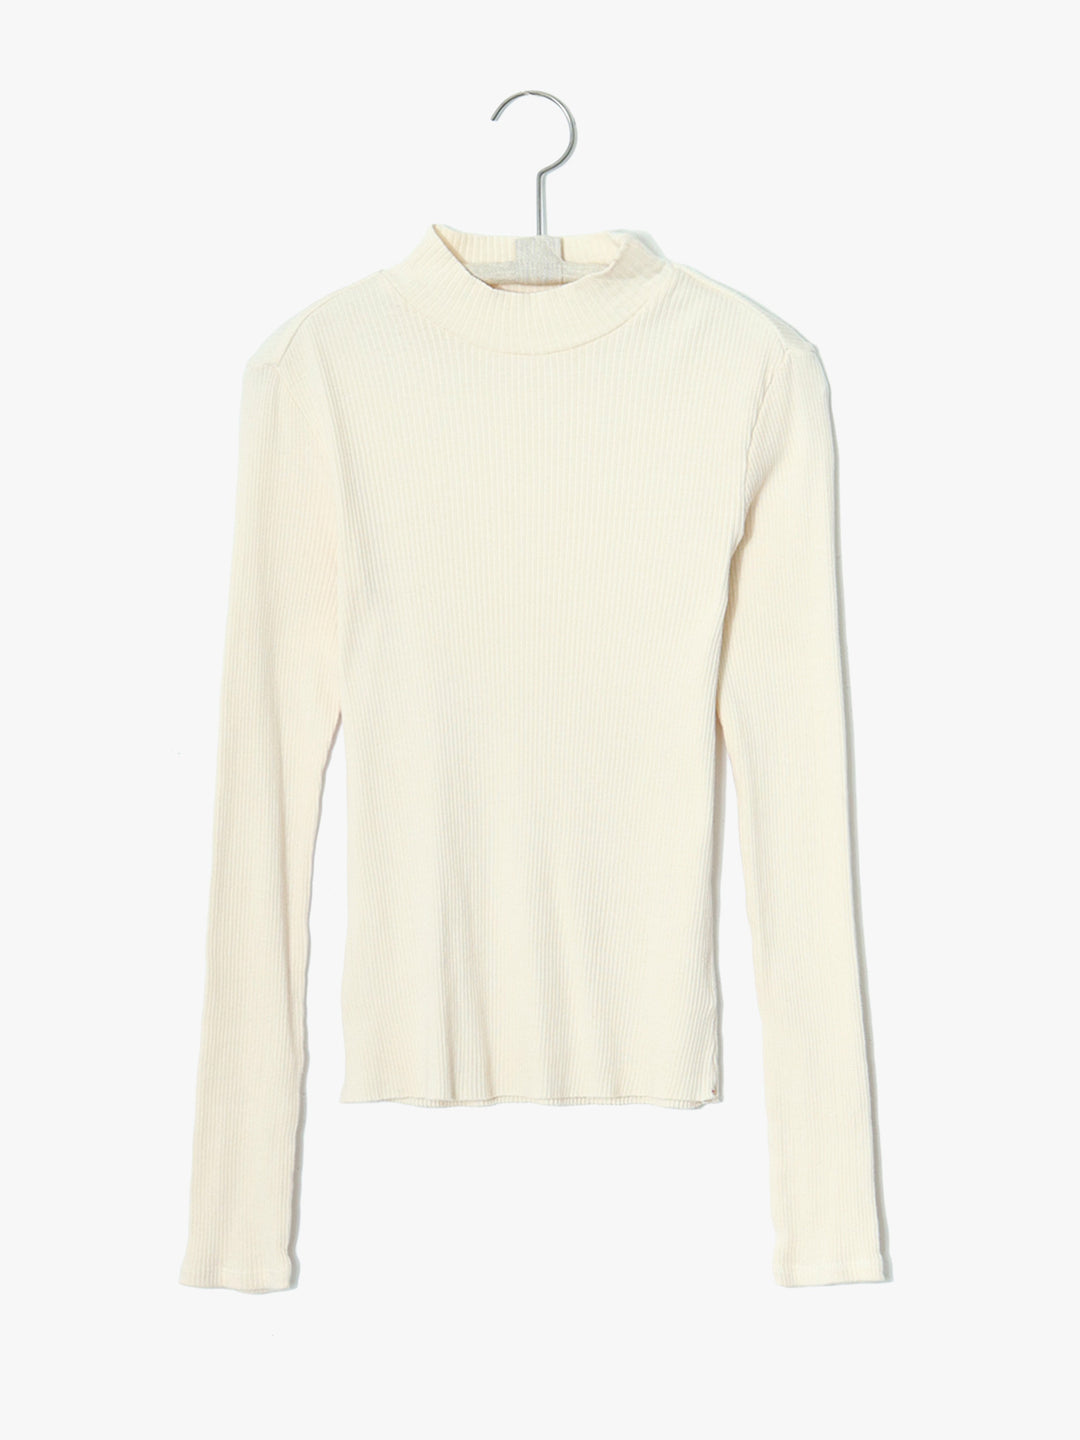 Xirena - Leith Knit Top in Ivory